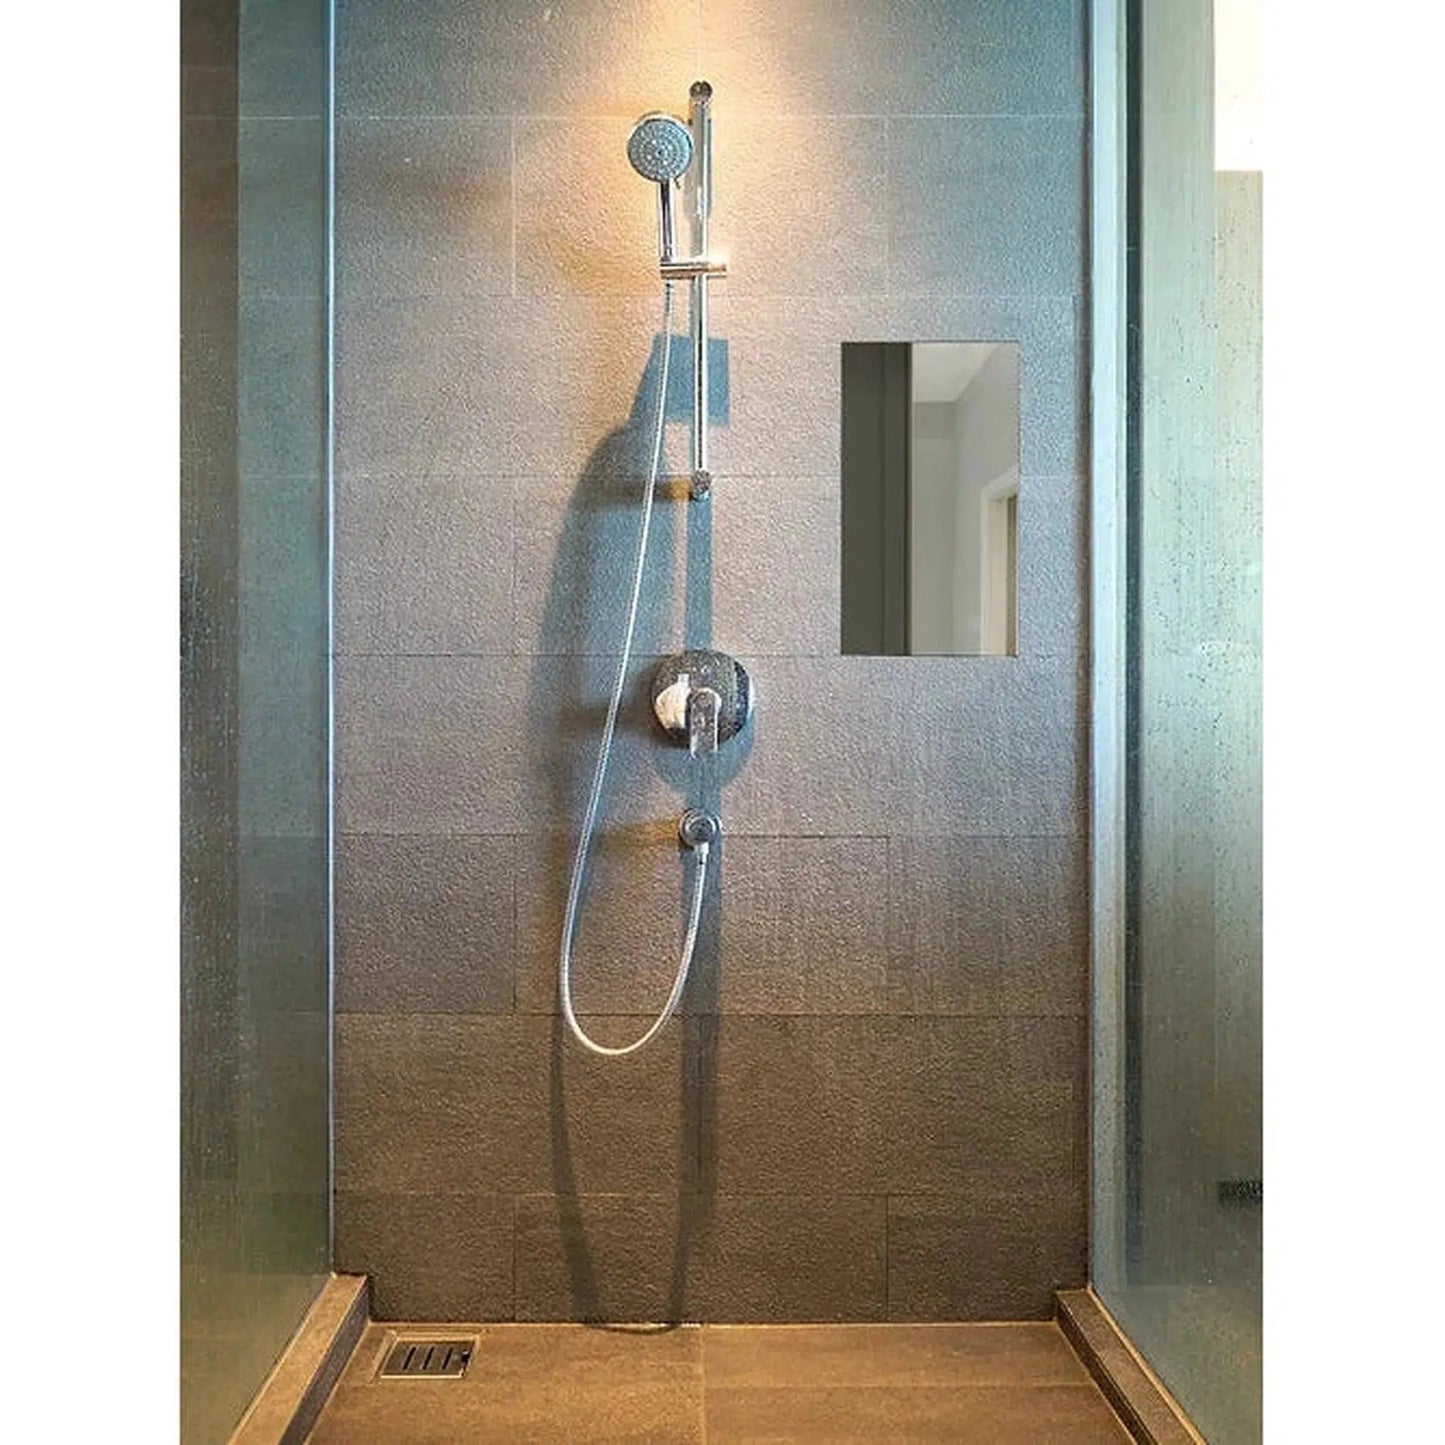 ClearMirror 16" x 16" Fog-Free Wall-Mounted Shower Mirror With Heating Pad